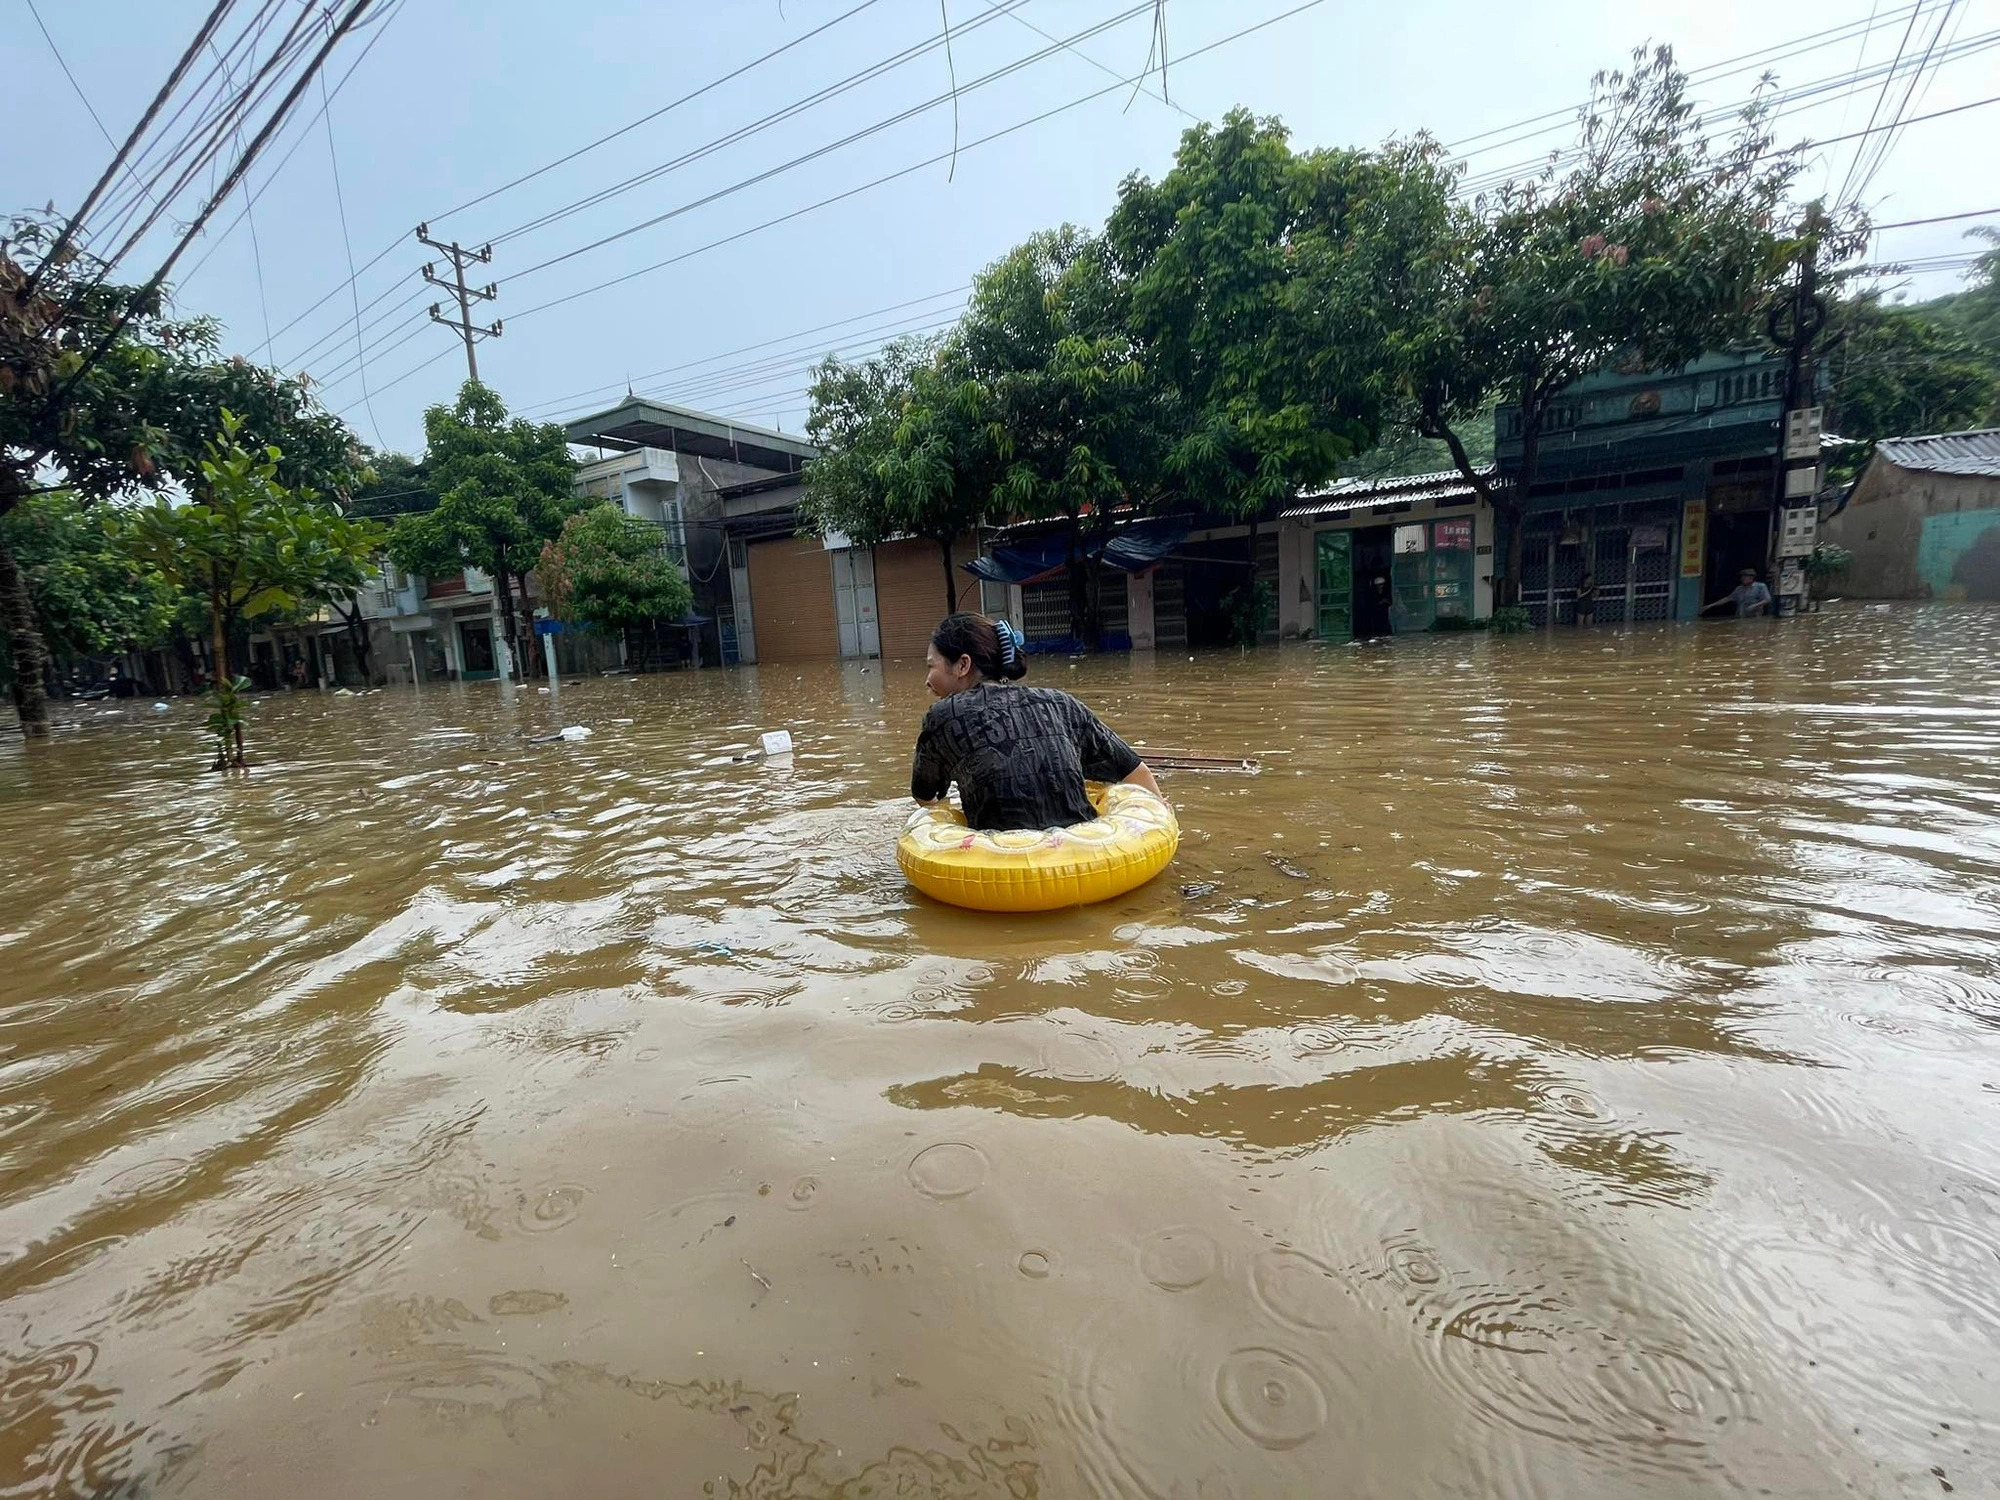 Residents use floaties to commute through waist-high flooding in Vietnam's mountainous region